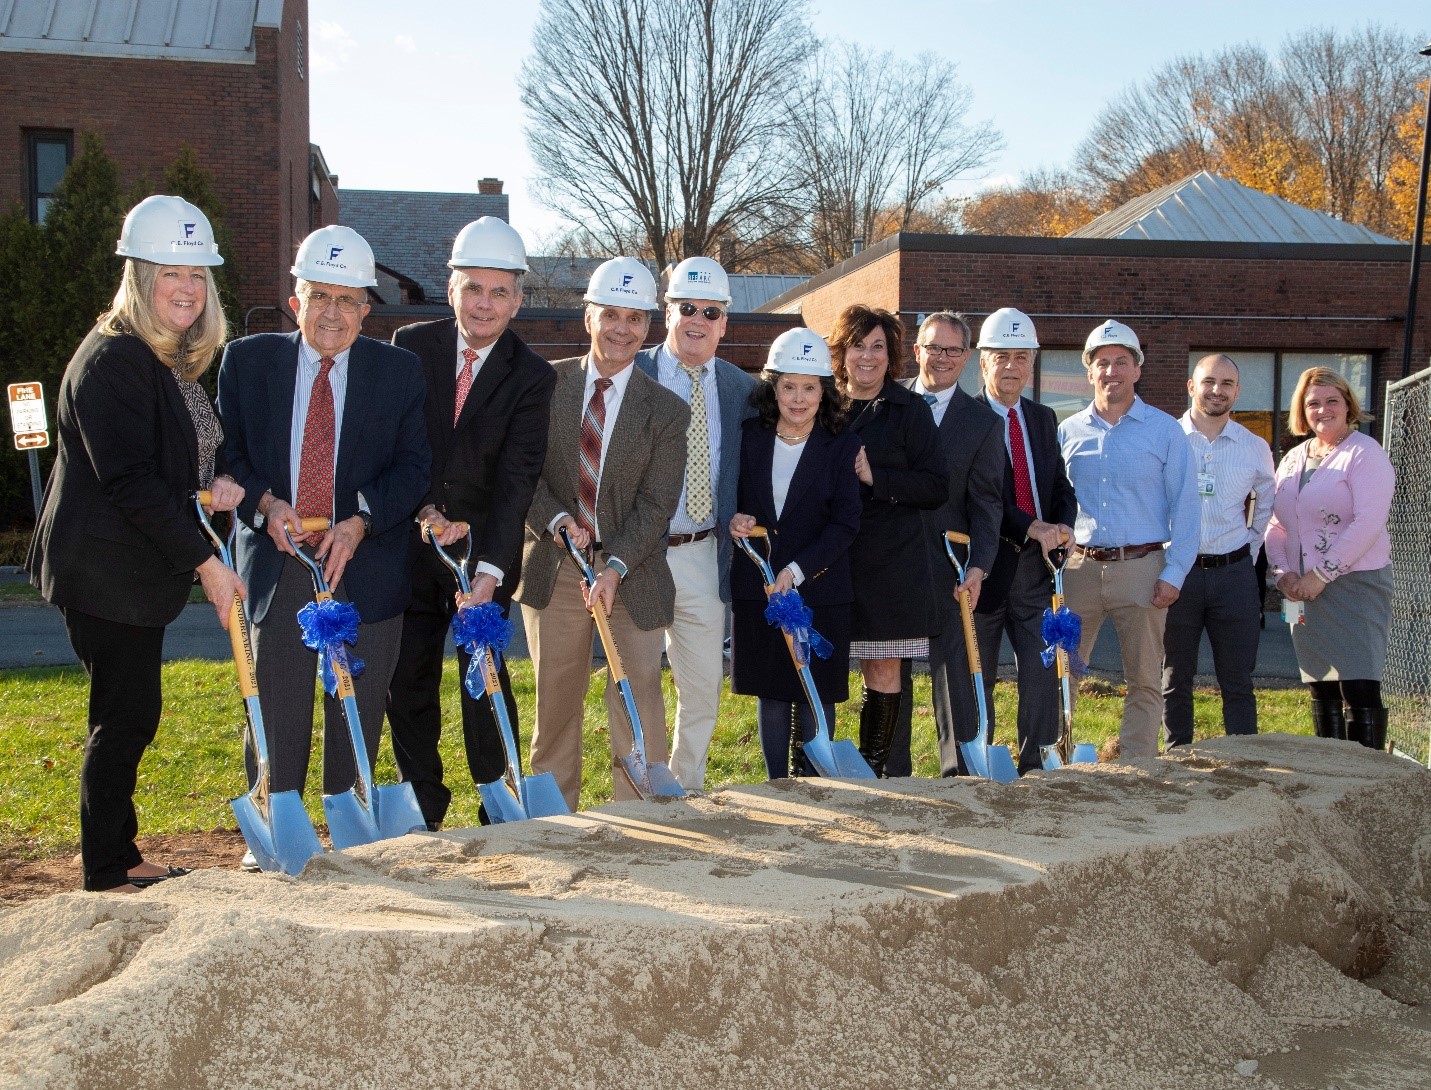 Breaking ground at Arbor Rose are, from left: Justine Moriarty, trustee, Jerome Home; Harry Mazadoorian, trustee, Jerome Home; Bill Moore, chamber of commerce; Dan Daigle, trustee, Jerome Home; Gerry Frank, architect, Bechtel Frank Erickson; Dr. Marie Gustin, trustee, Jerome Home; Lisa Connolly, vice president, Hartford HealthCare Community Network; Keith Robertson, Zeigler; Jeff Palmer, C. E. Floyd; Noah Morgan, project manager, Hartford HealthCare; Lori Toombs, executive director, Arbor Rose.